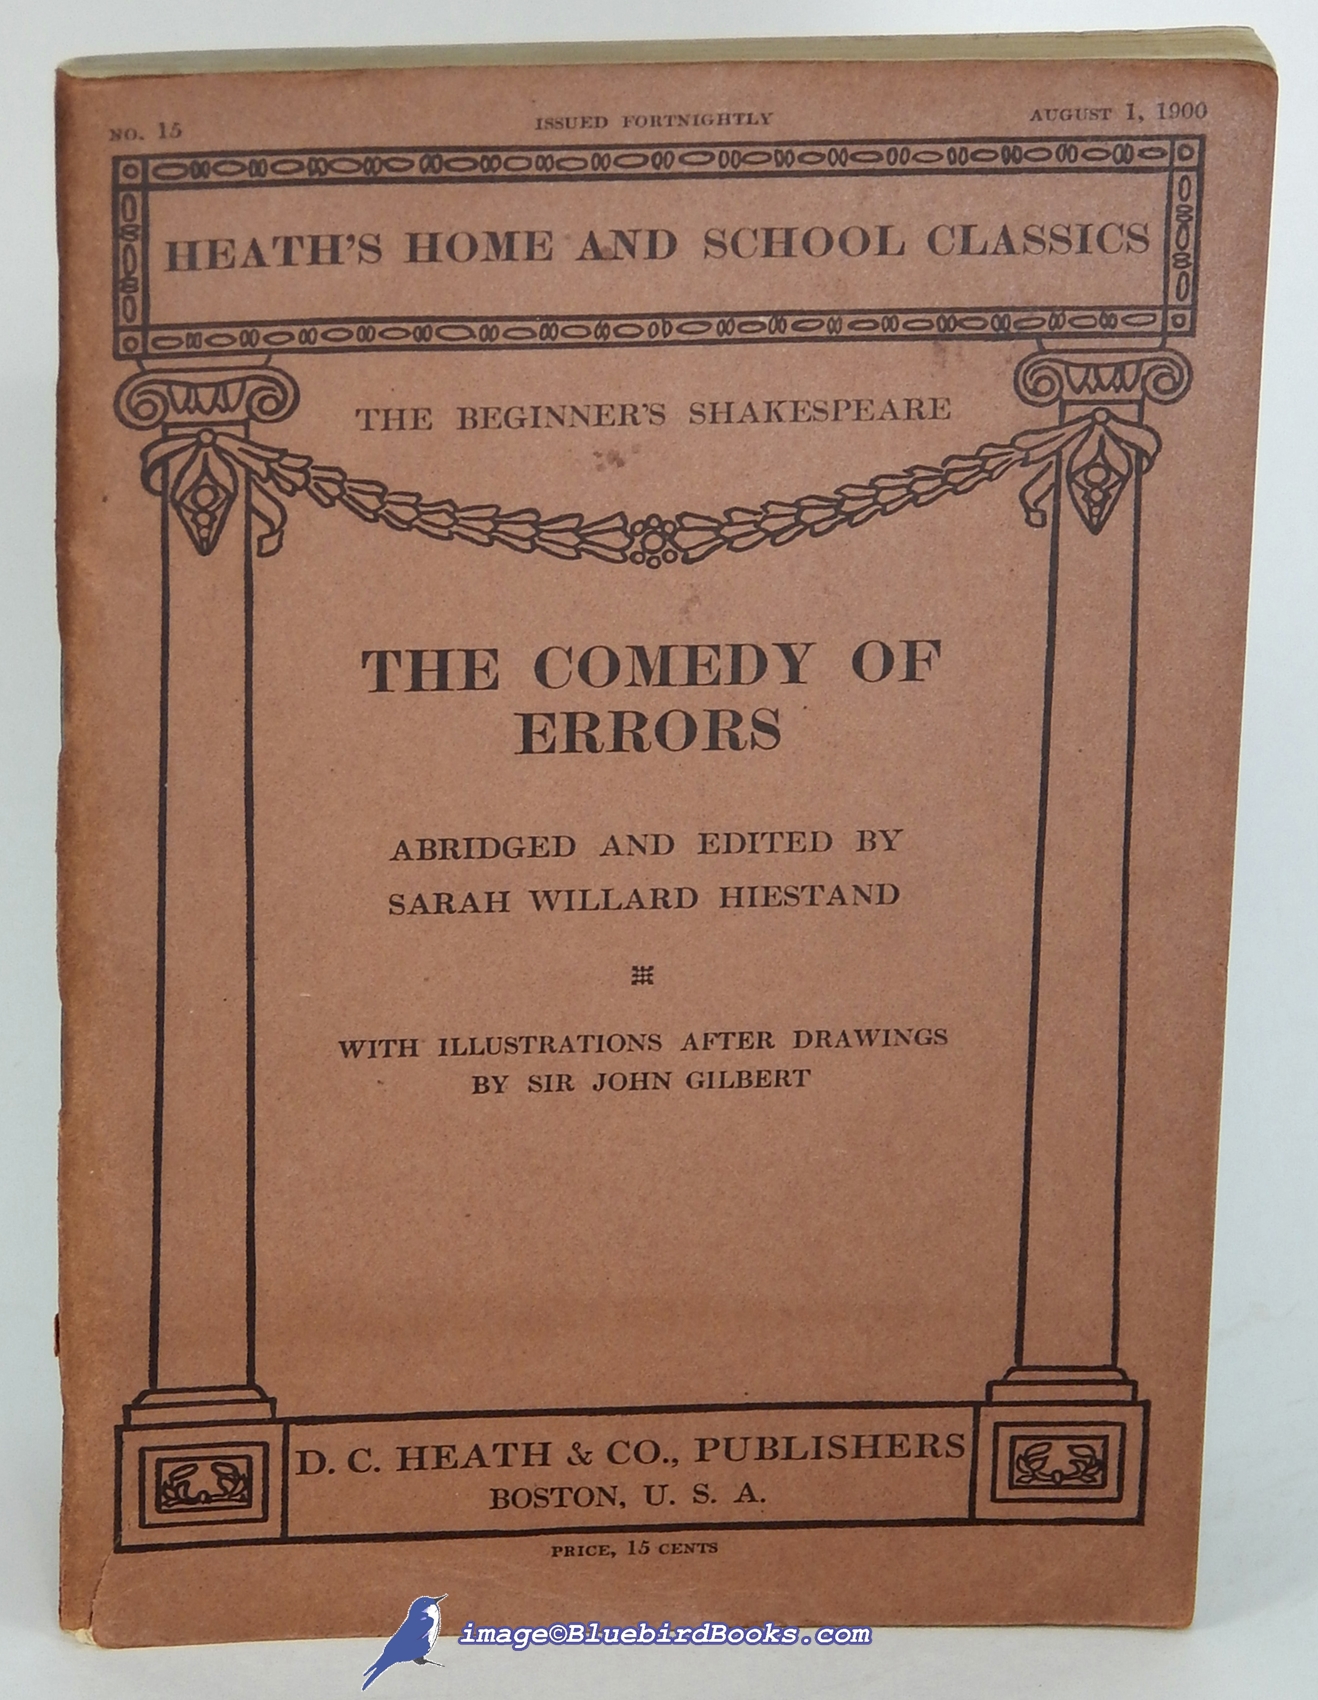 SHAKESPEARE, WILLIAM; HIESTAND, SARAH WILLARD (EDITOR) - The Comedy of Errors [Abridged for Younger Readers] the Beginner's Shakespeare: Heath's Home and School Classics